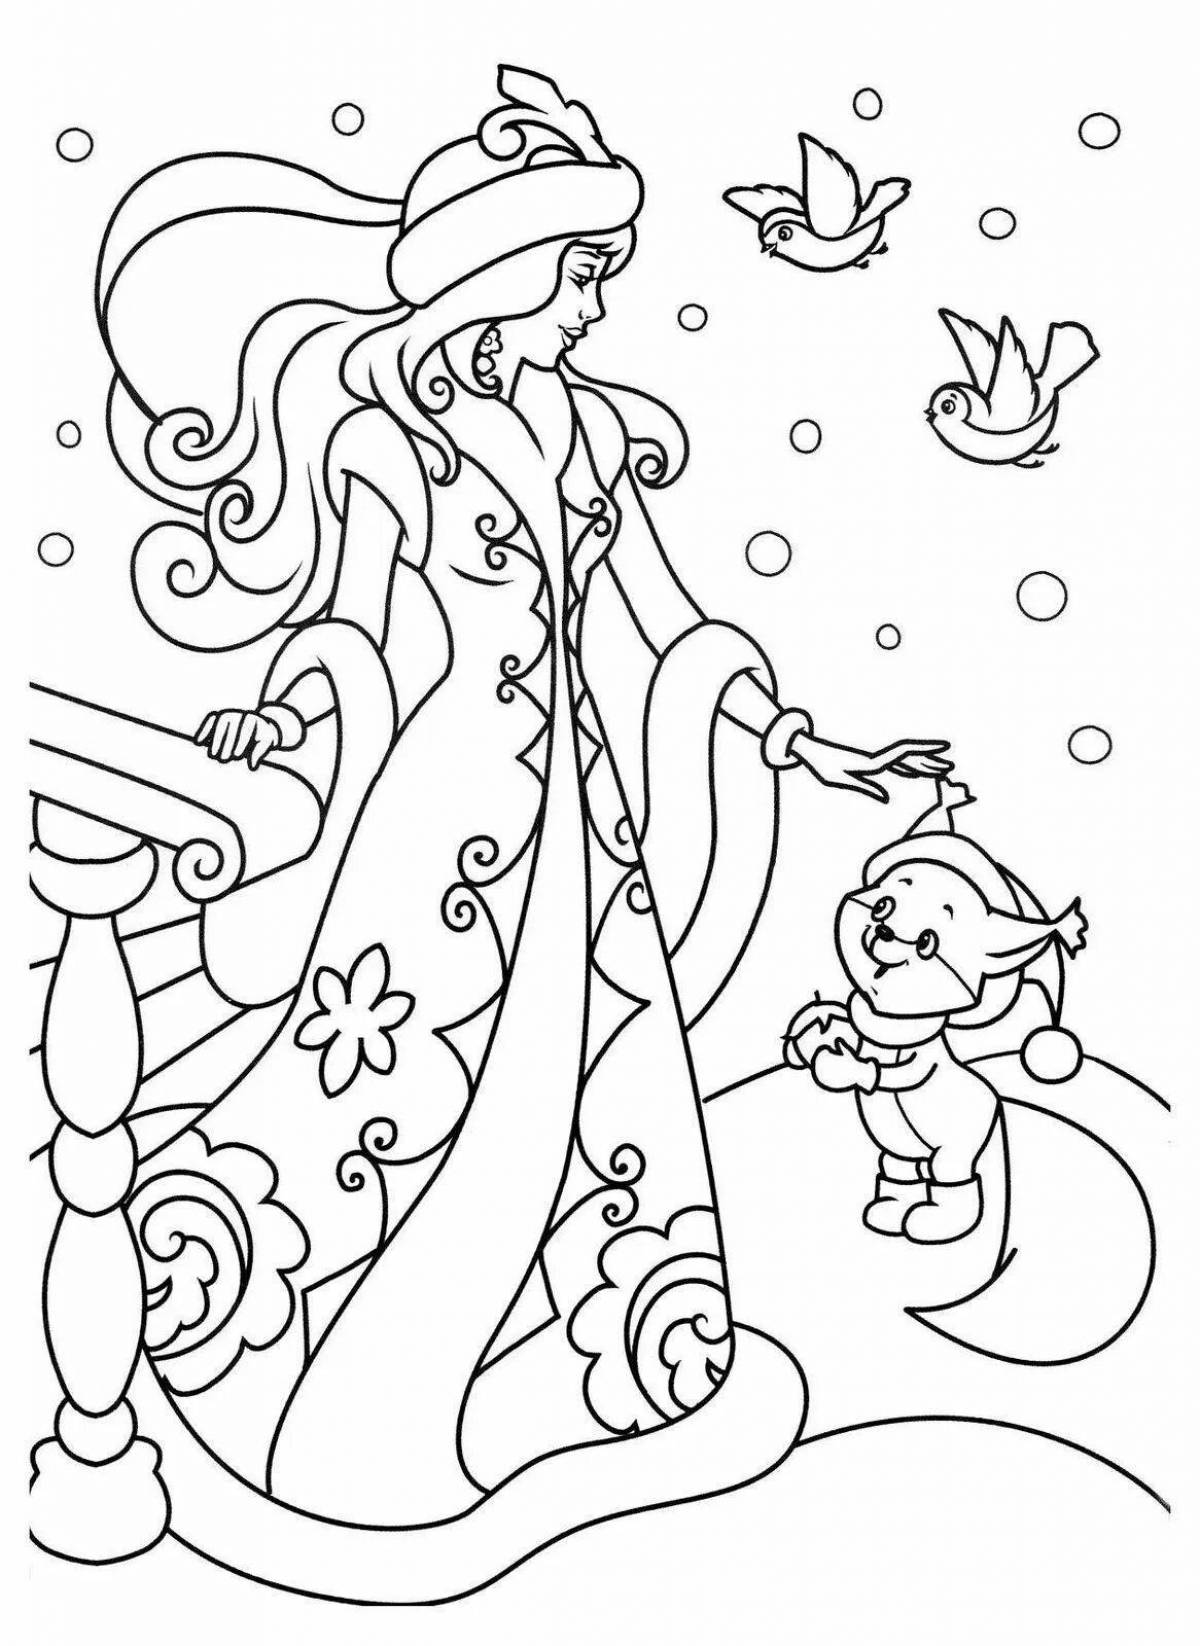 Coloring book glamorous Santa Claus and Snow Maiden